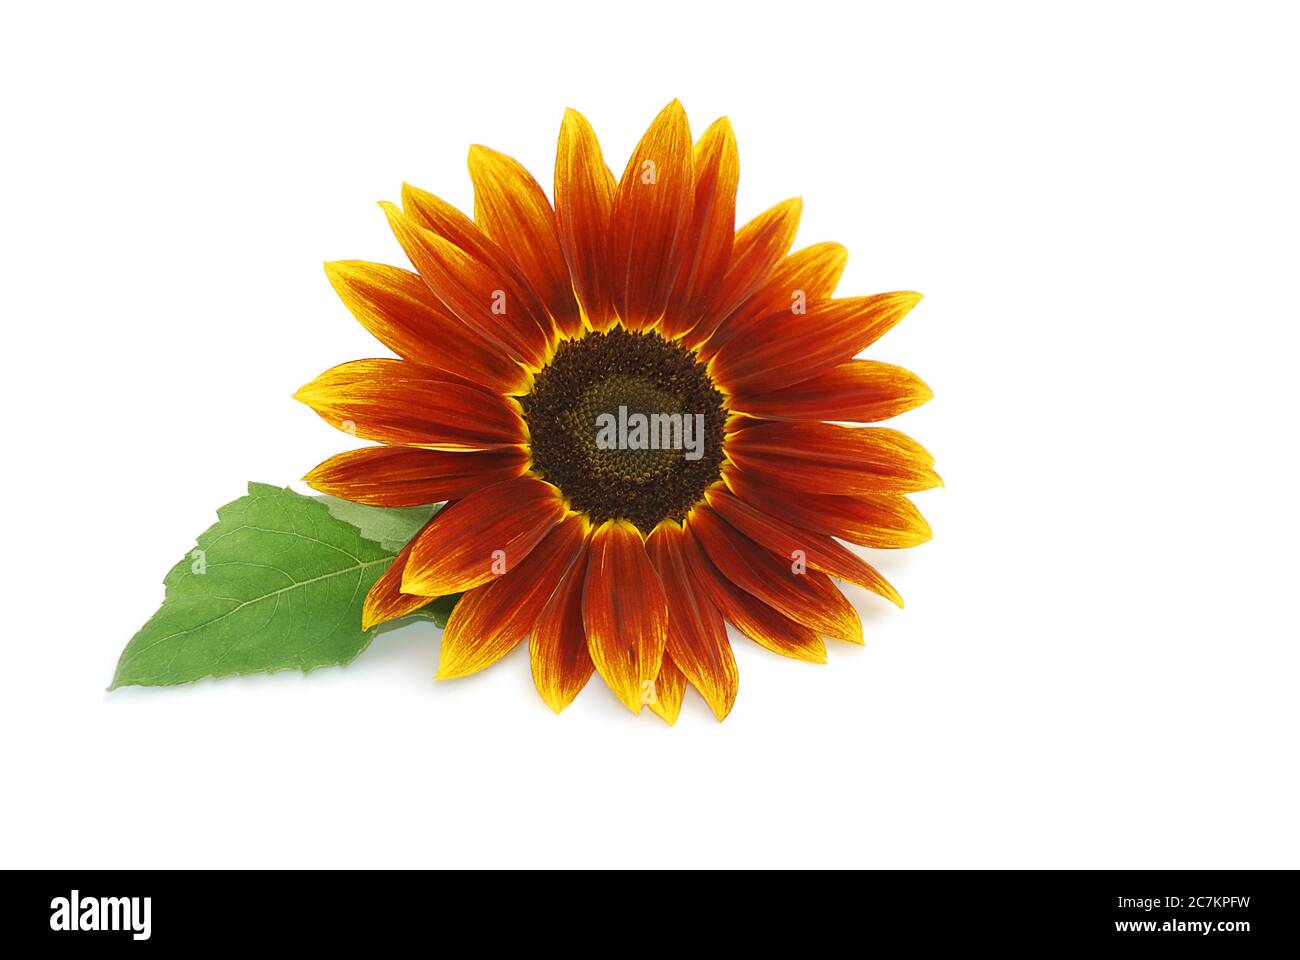 Isolated sunflower lies on a white background Stock Photo